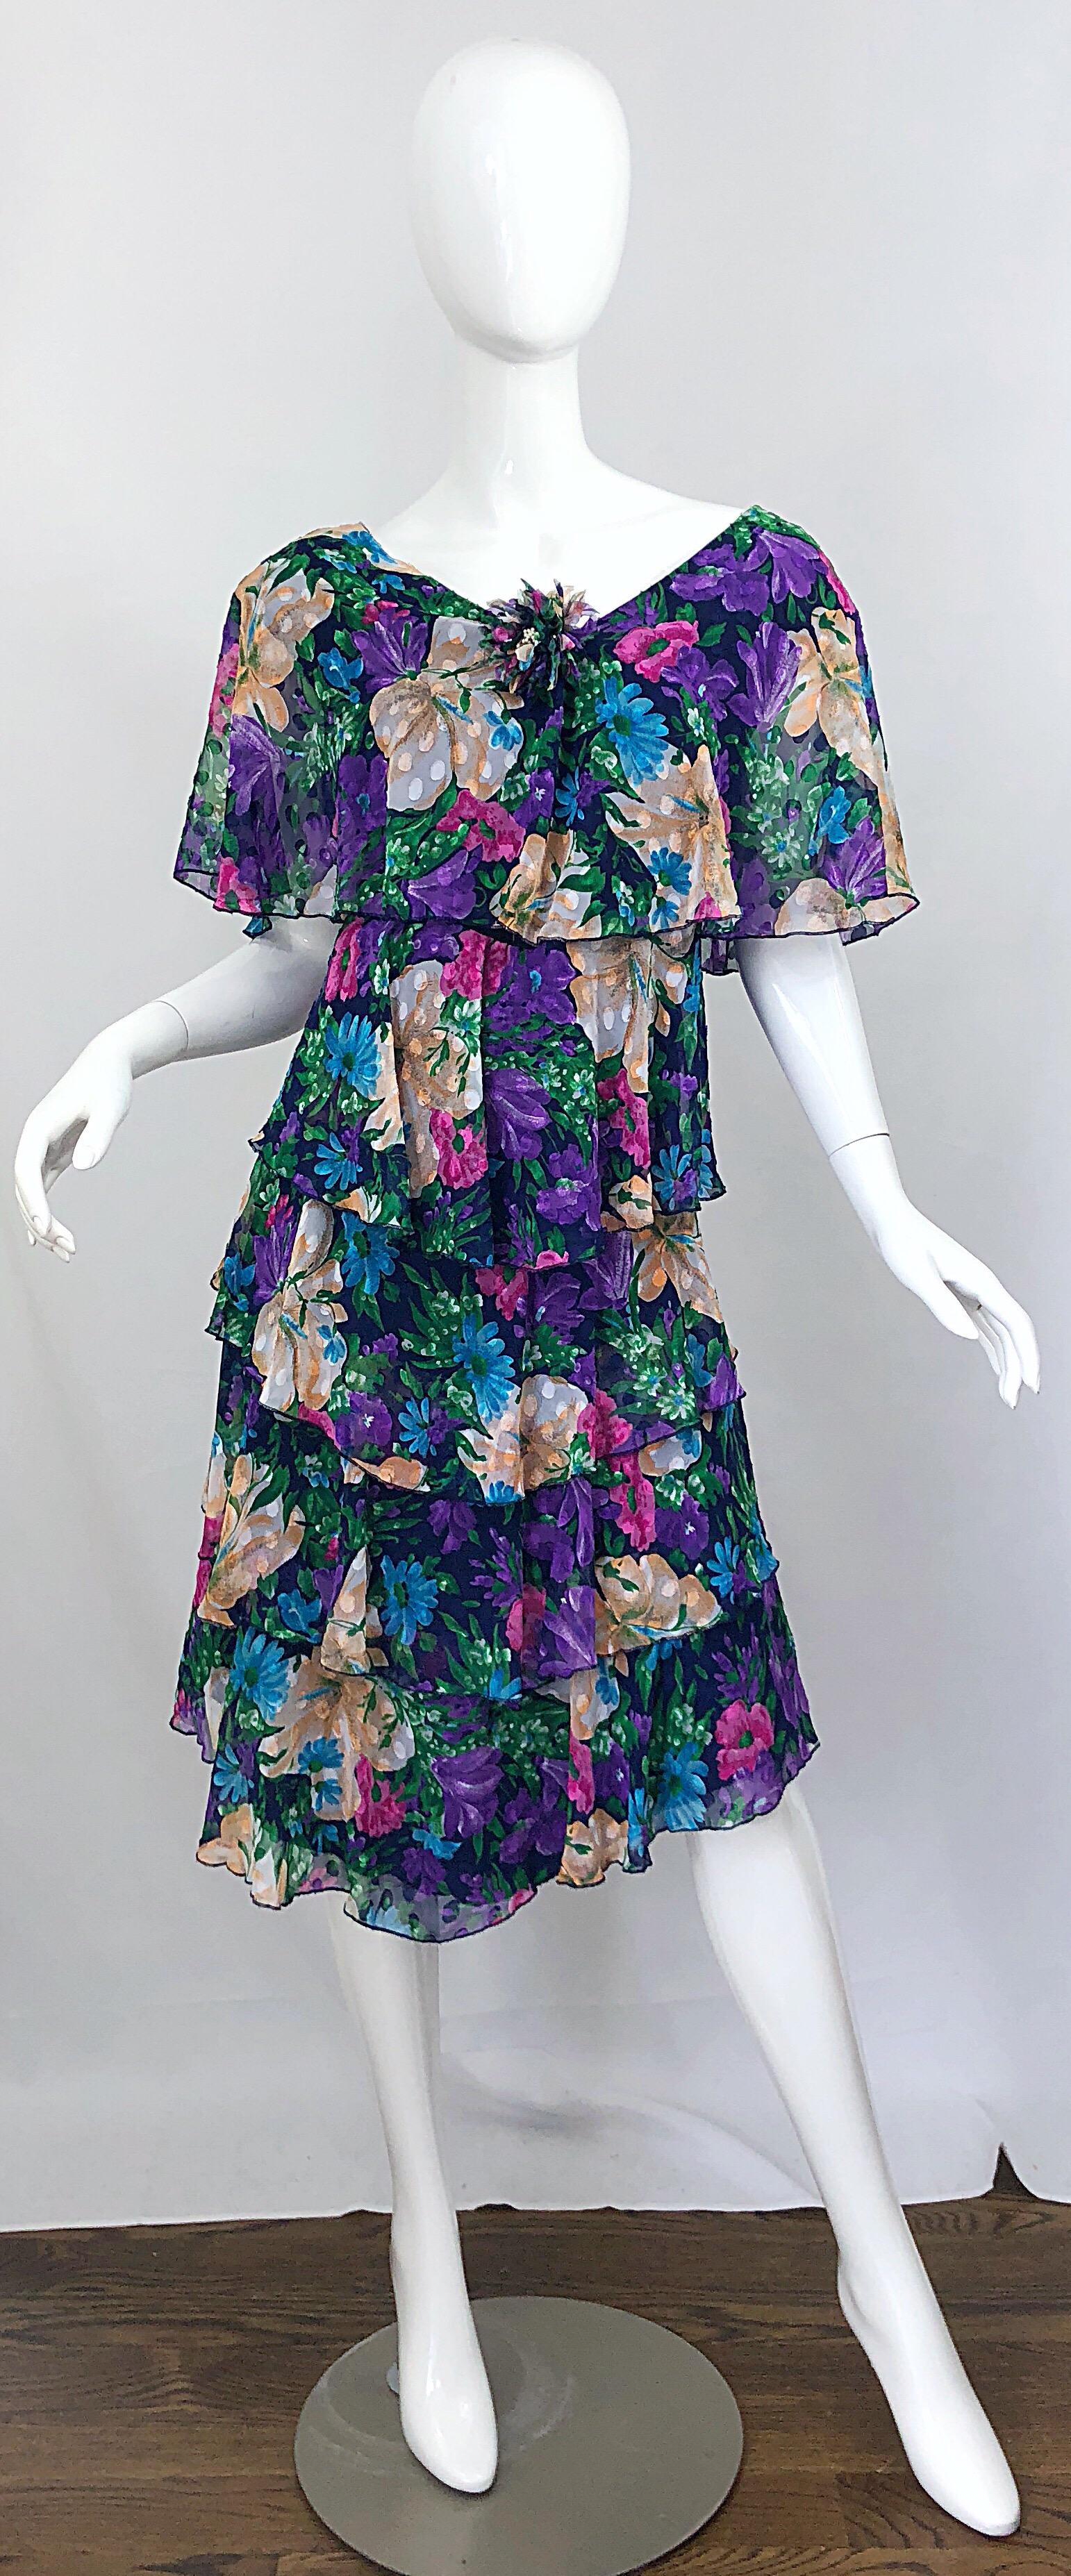 Beautiful 1980s JUSTIN DAVID floral chiffon larger size flapper style dress! Features flowers in vibrant colors of blue, turquoise teal, purple, pink, green, tan and white throughout. Flower brooch at center bust features dozens of tiny pearls, and